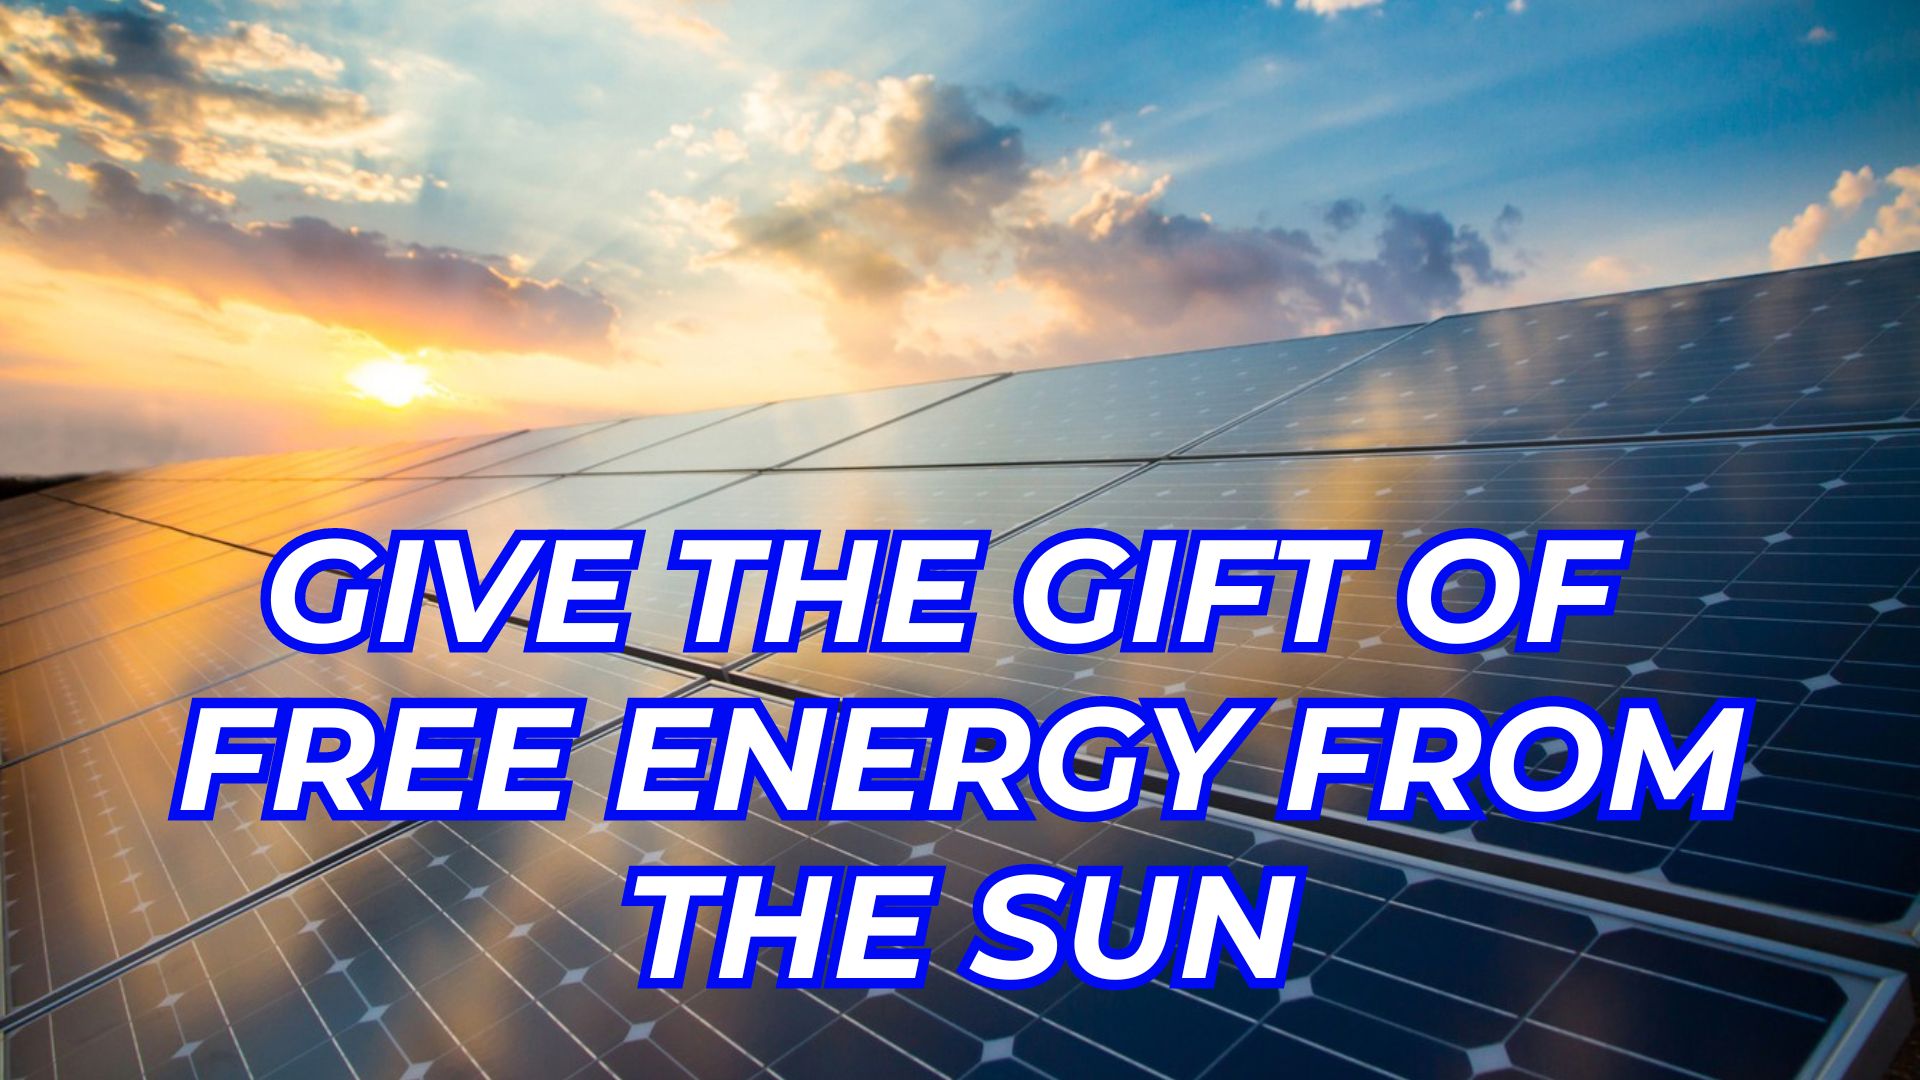 Give the gift of free energy from the sun